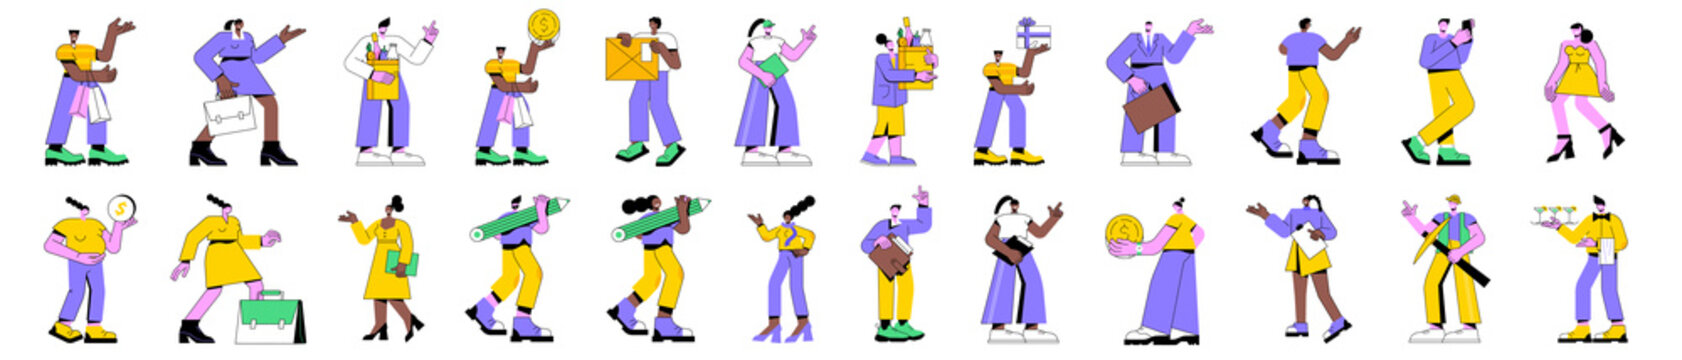 Colorful linear vector isolated illustration set of isolated characters in daily pursuits. People going shopping, going to office, daily routine. Restaurant and bank diverse workers. Urban lifestyle.